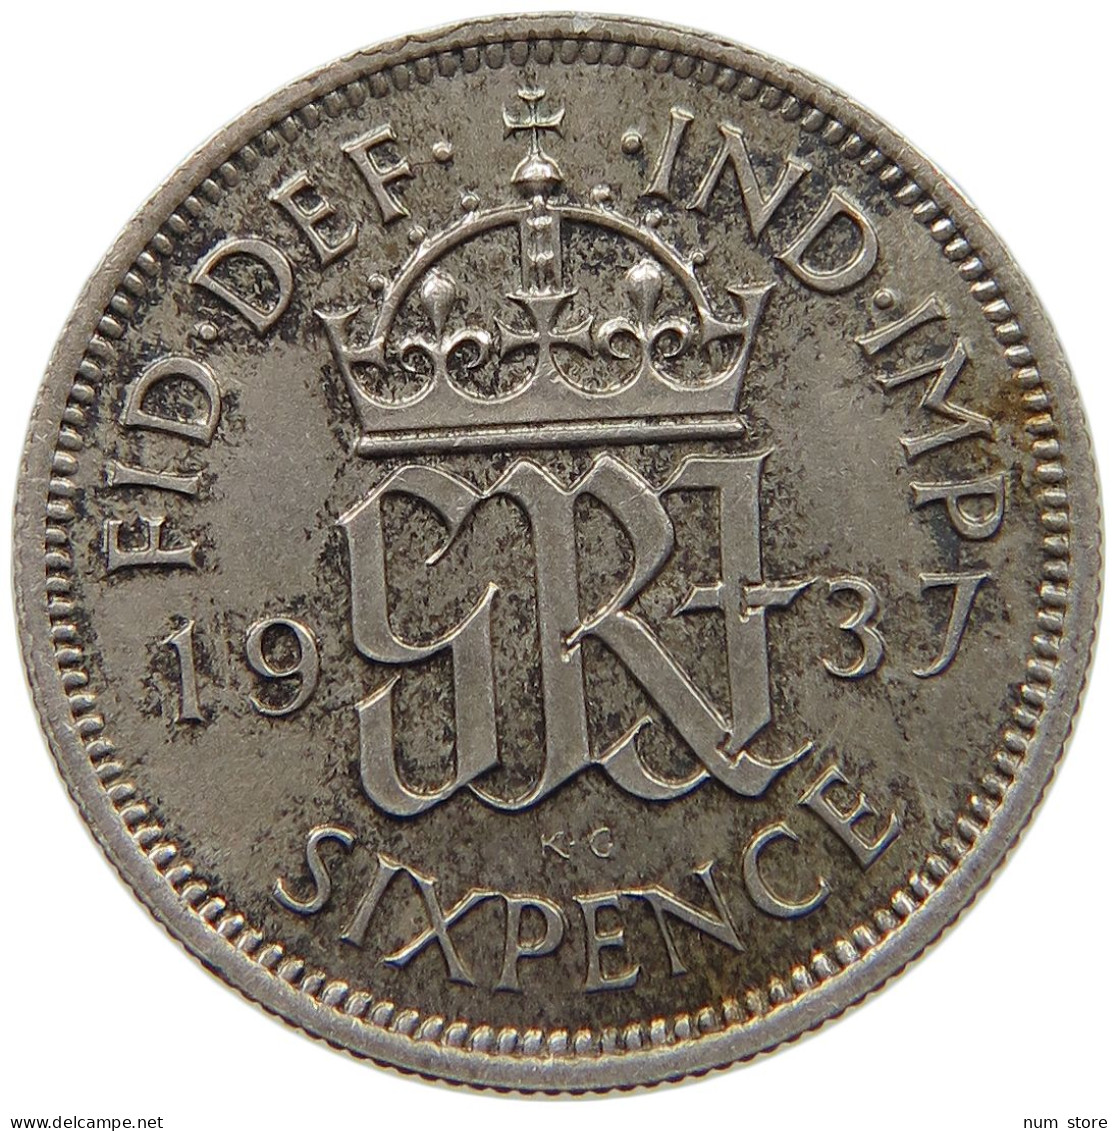 GREAT BRITAIN SIXPENCE 1937 George VI. (1936-1952) #c002 0107 - H. 6 Pence